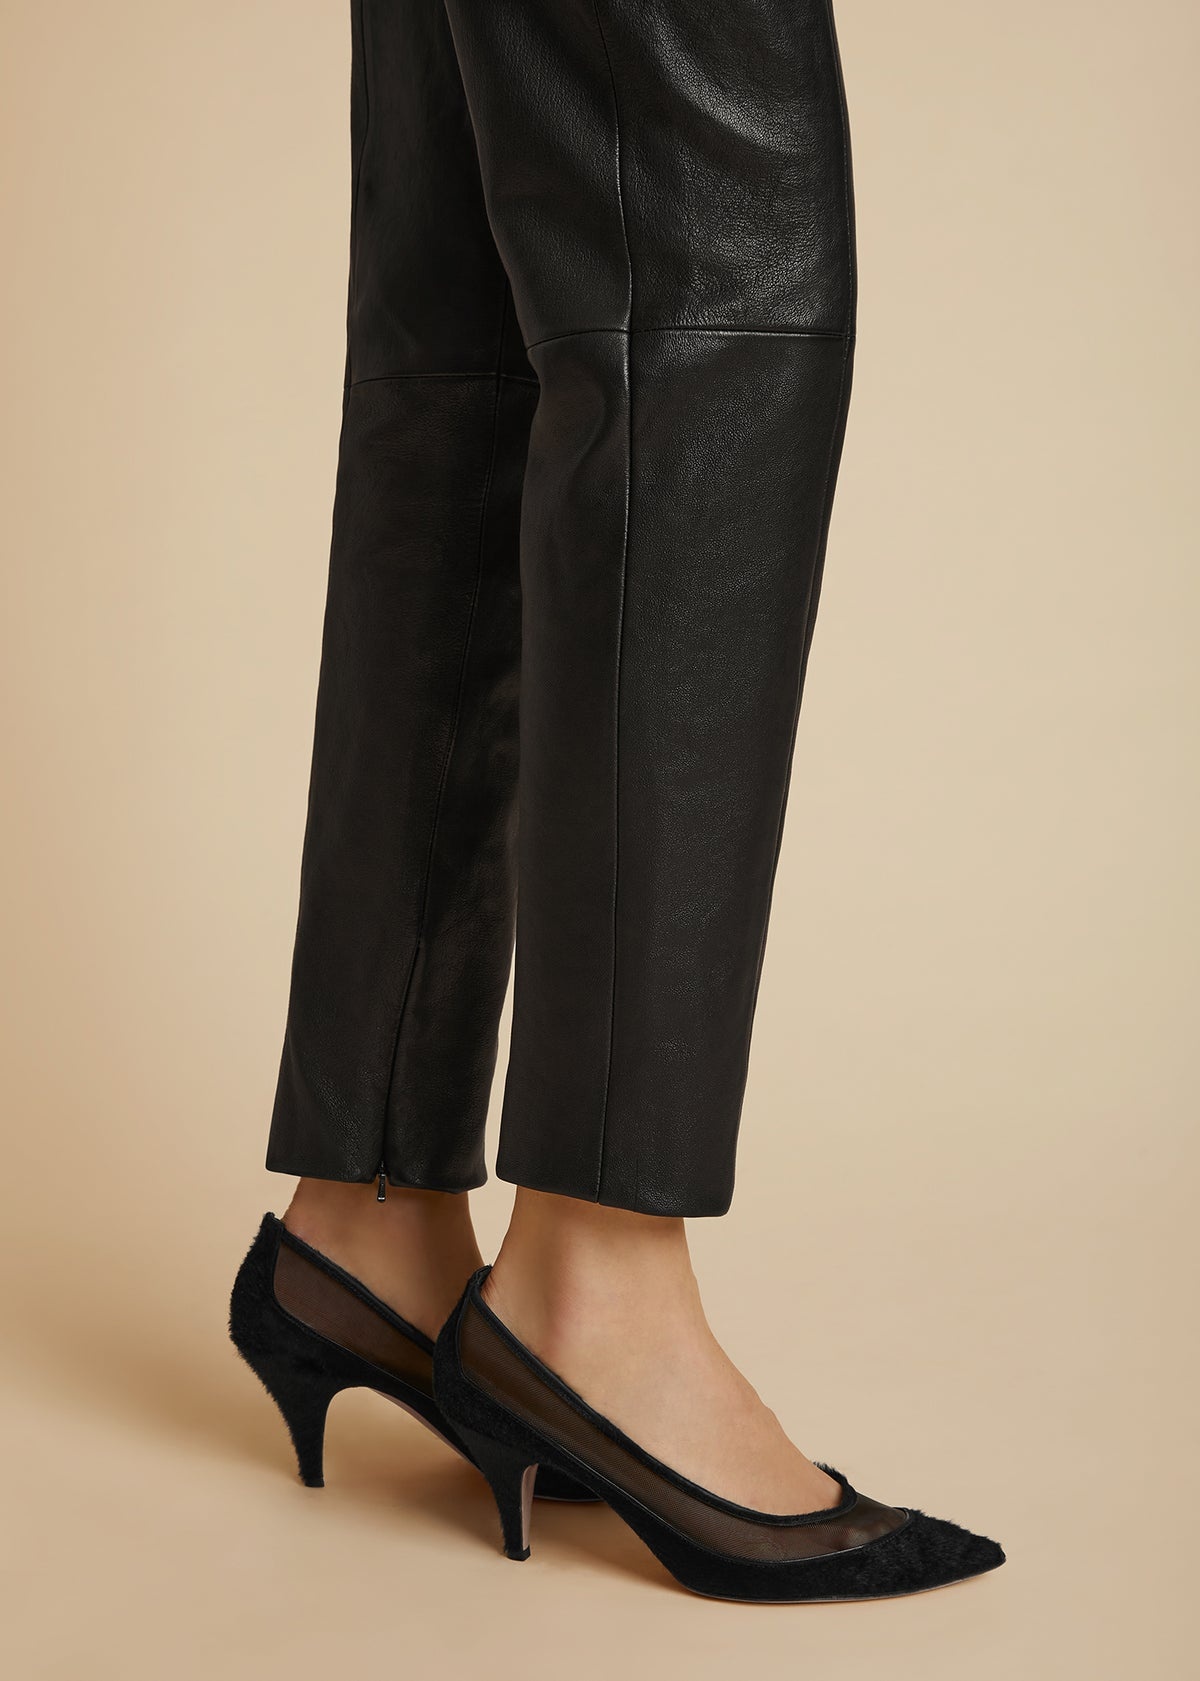 The Waylin Pant in Black Leather - 5